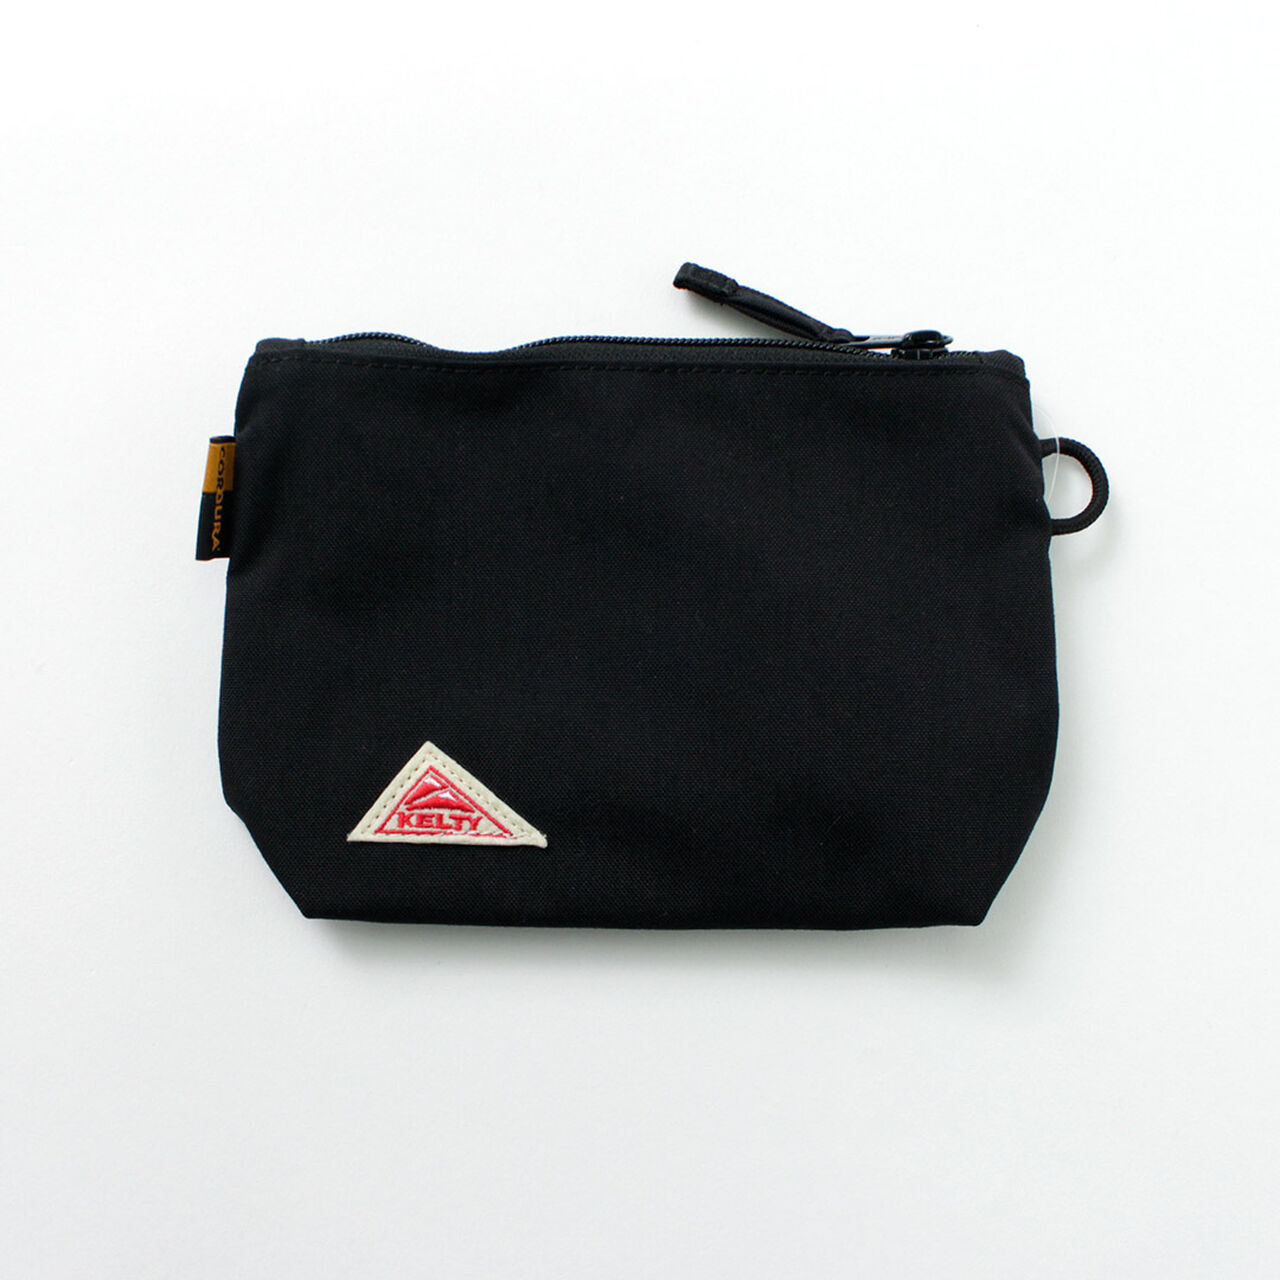 Handy Pouch 2,Black, large image number 0